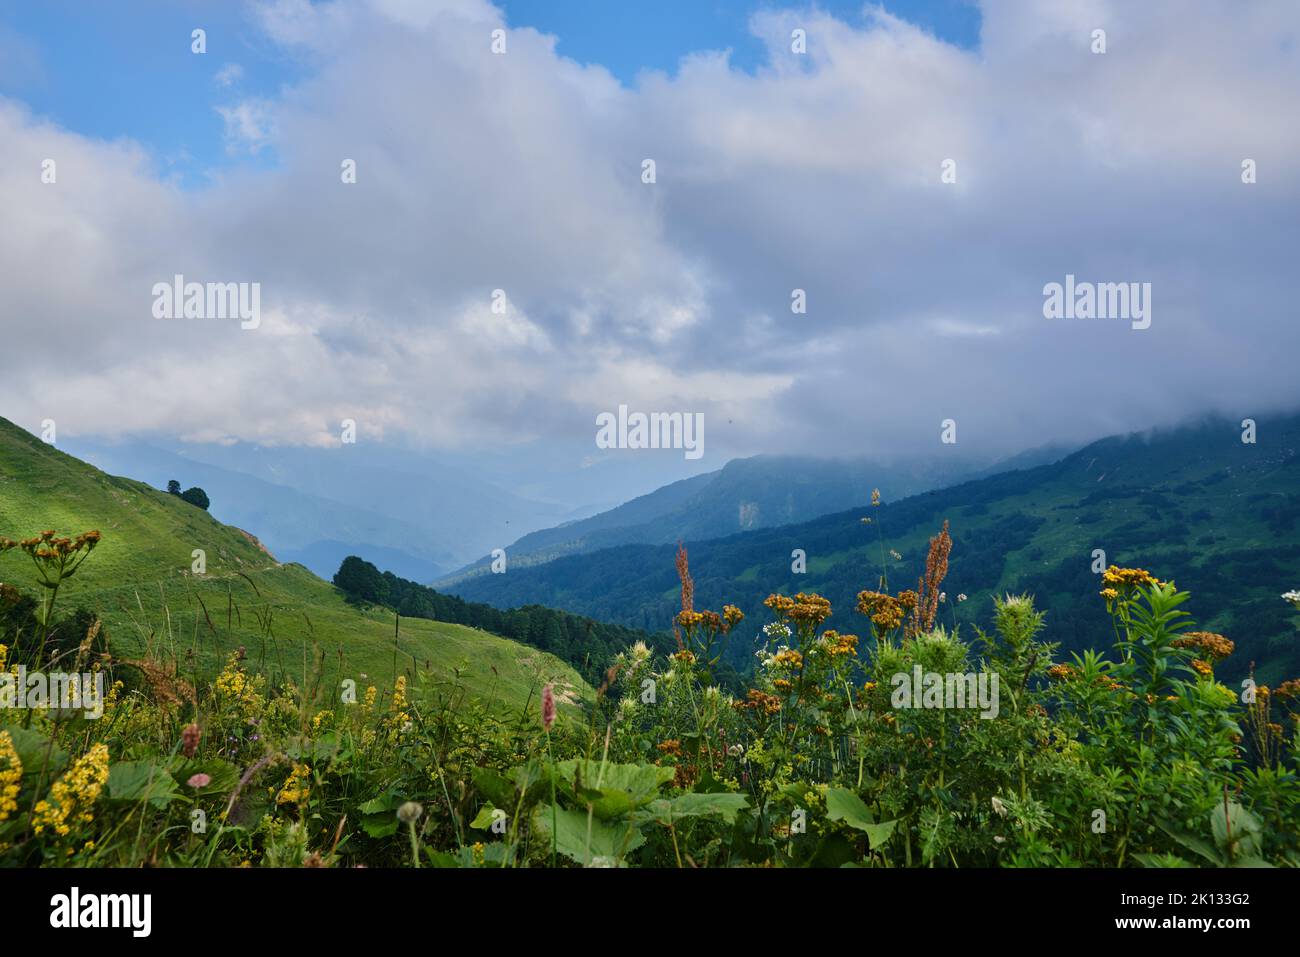 Green hills under a cloudy sky, bright flowers in the foreground. Summer mountain landscape. Stock Photo